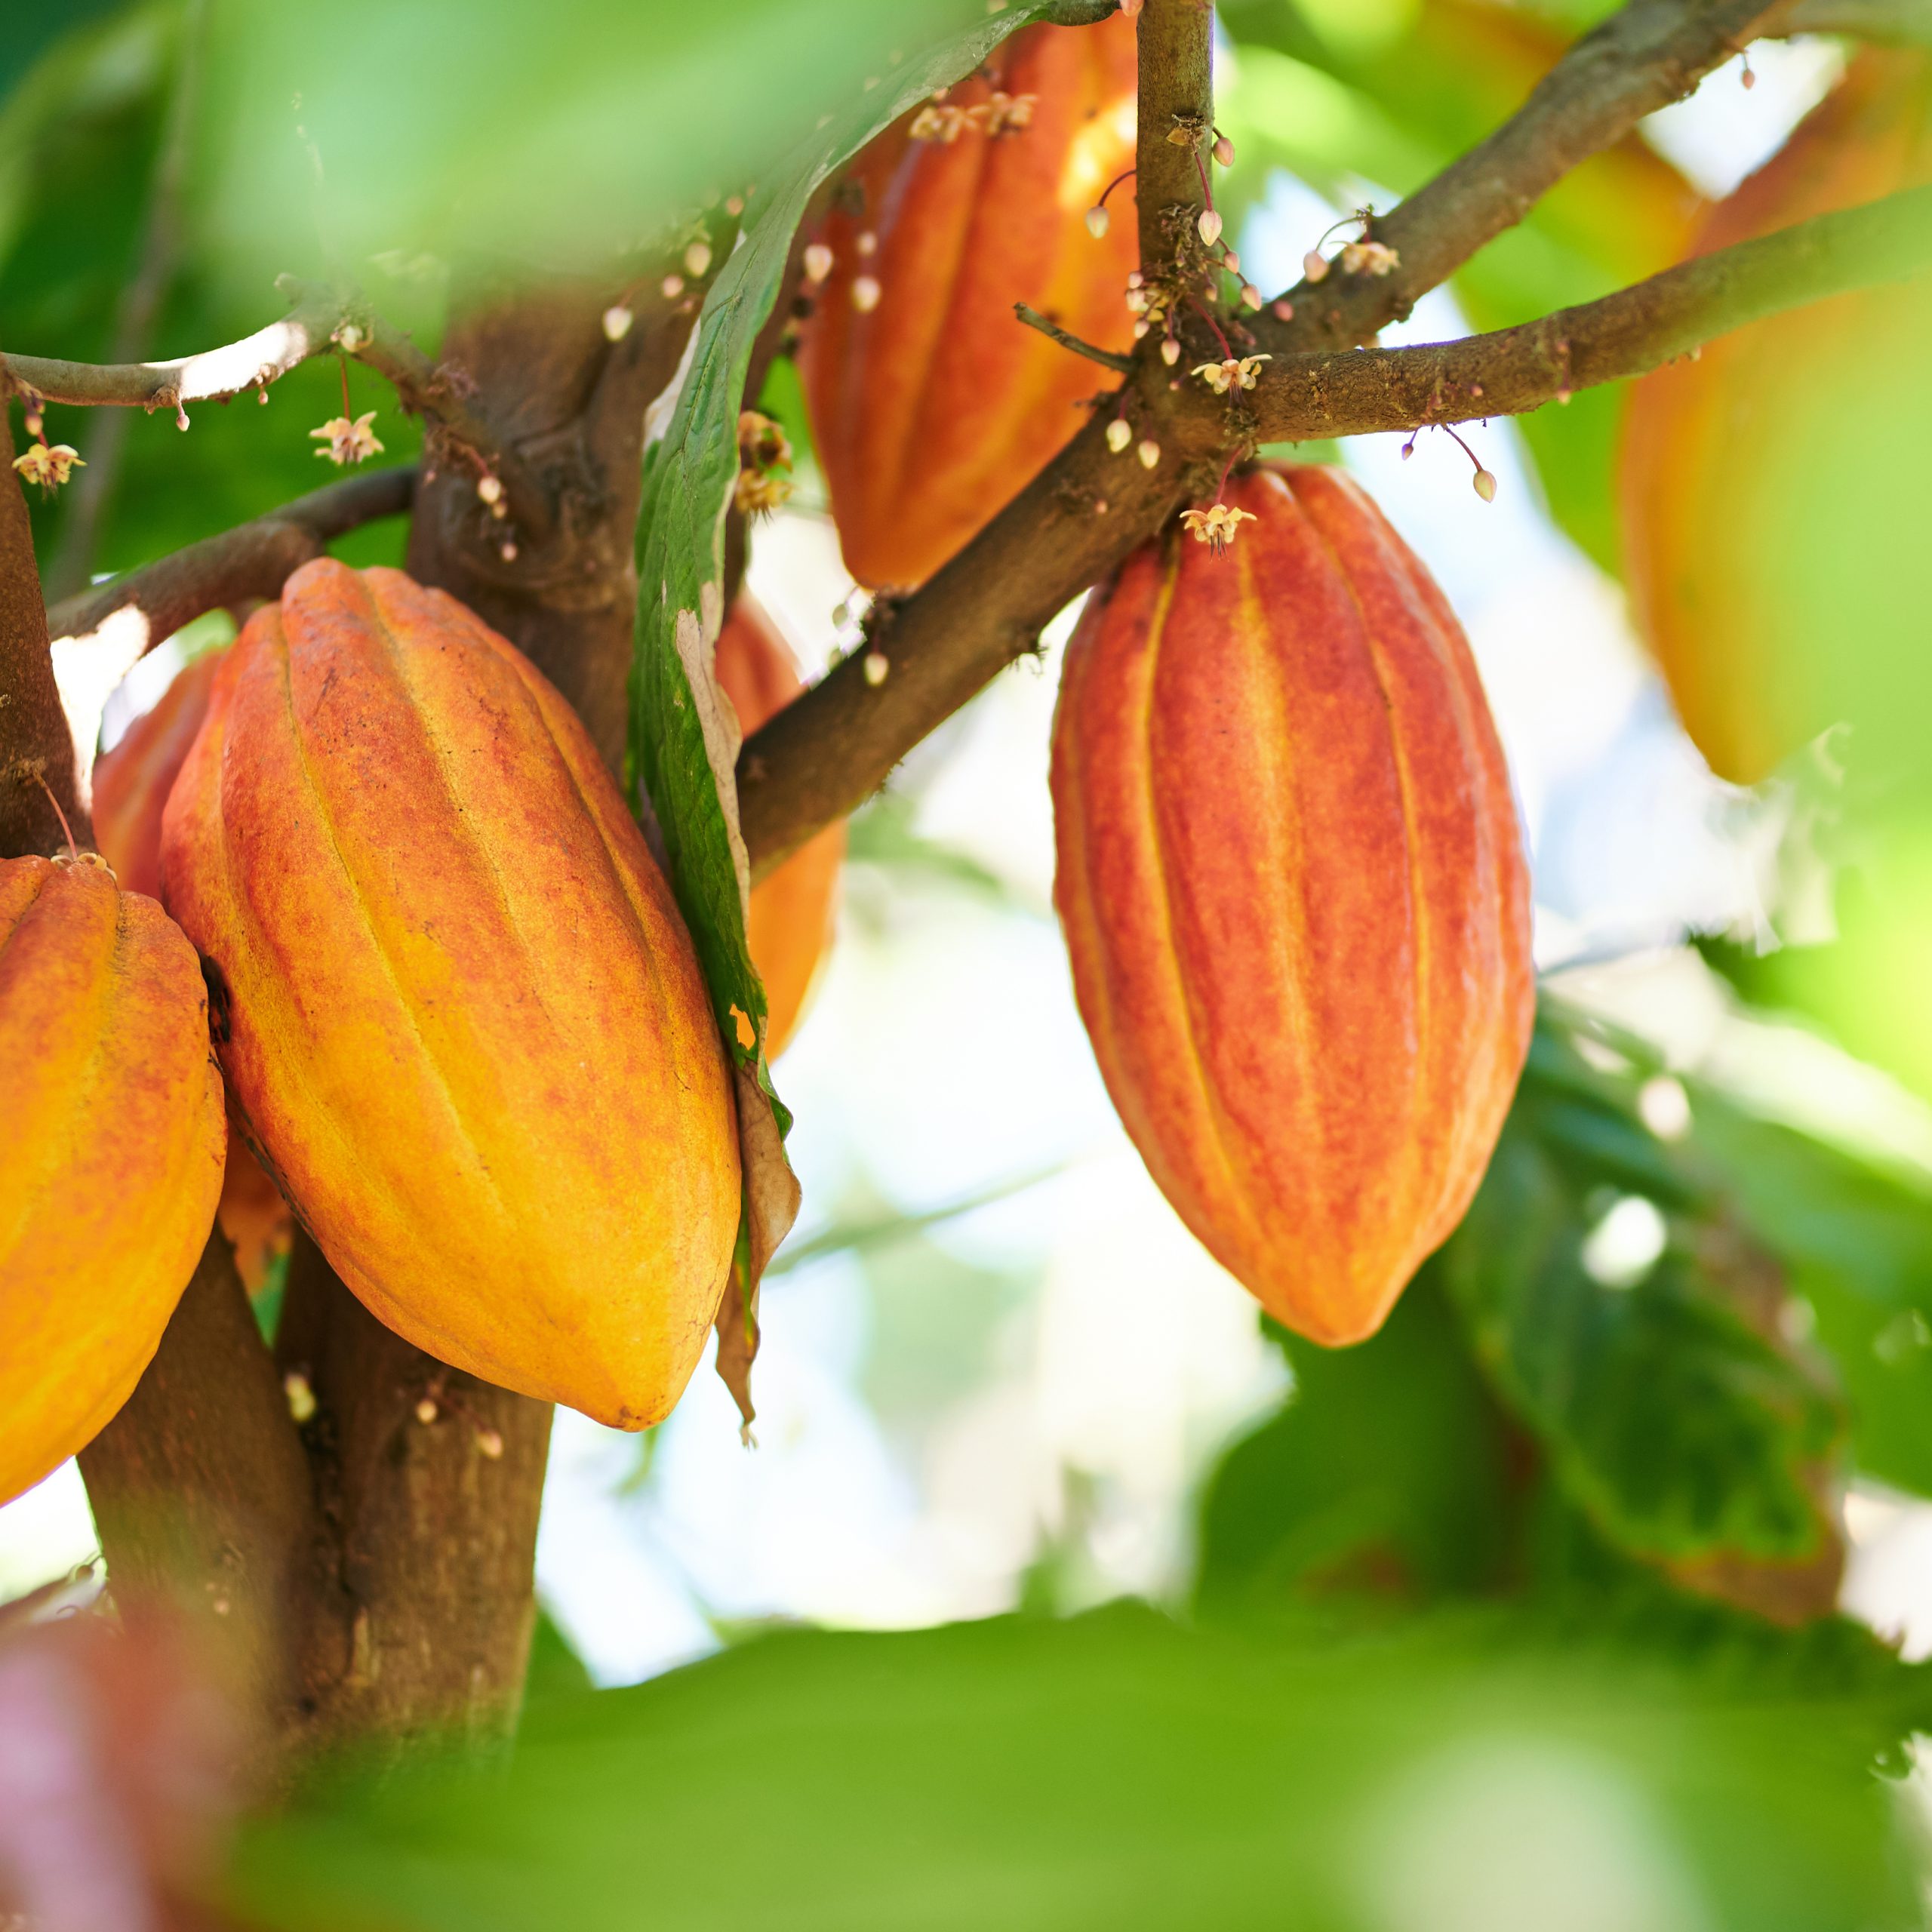 Cacao harvesting theme. Orange color cocoa pods hanging on tree in sunlight